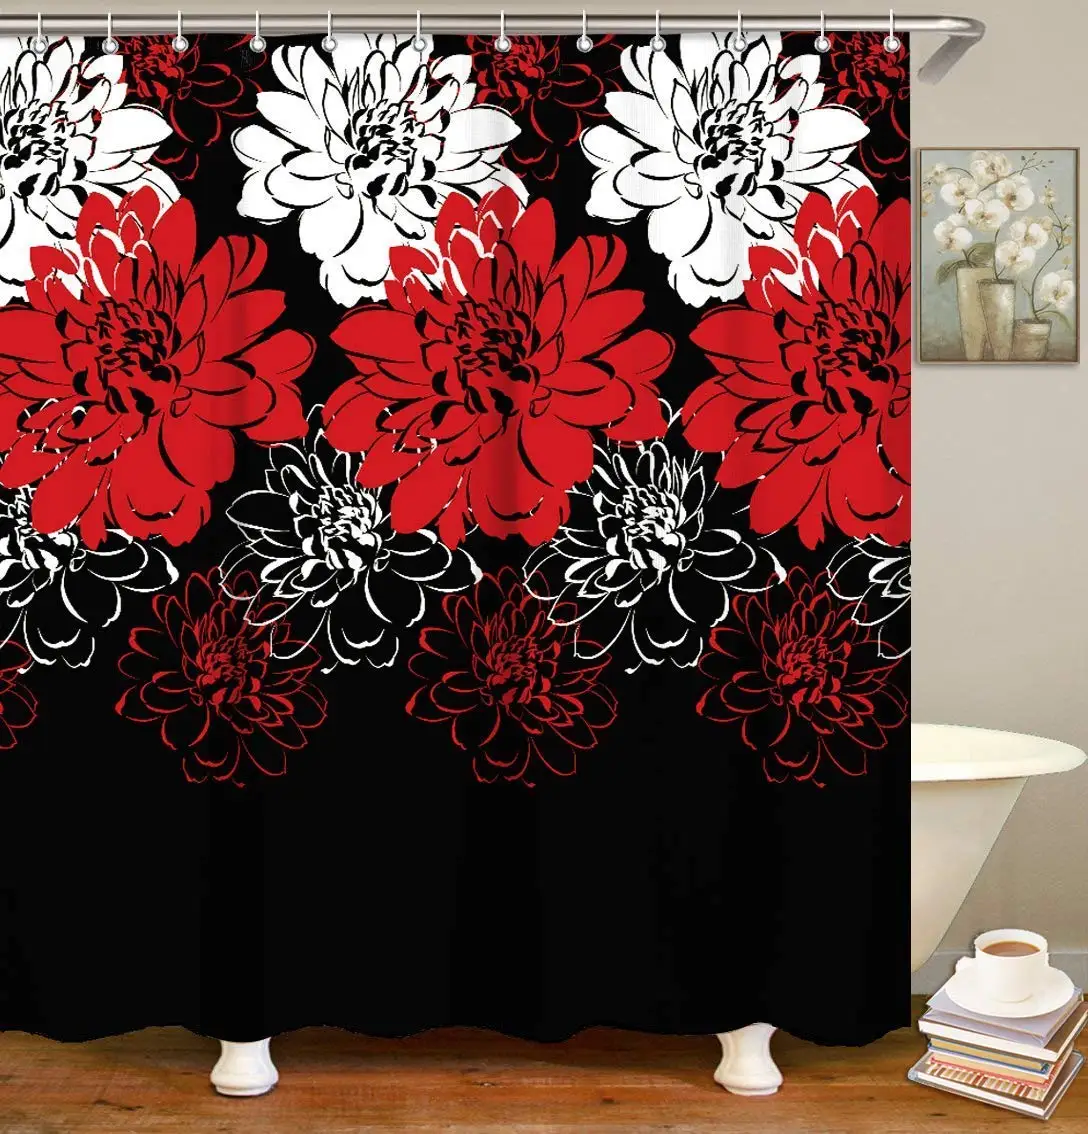 Details about   Red and Black Roses Shower Curtain Bathroom Decor Fabric 12hooks 71in 